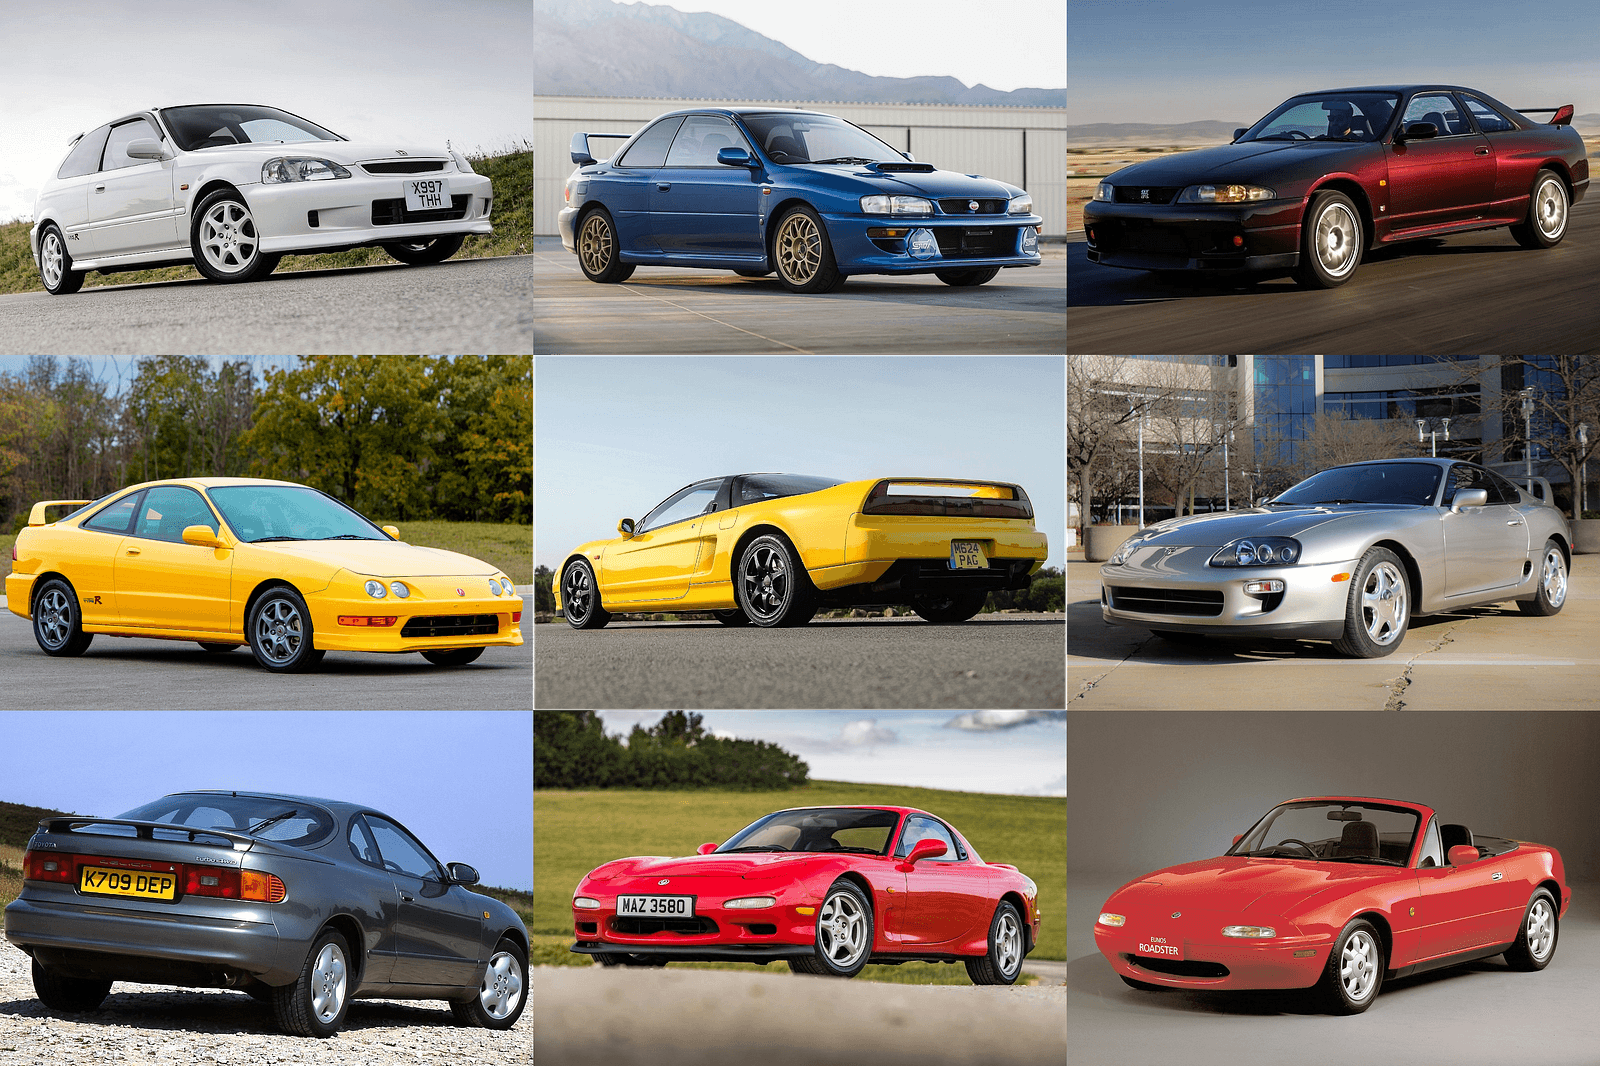 The Evolution of Honda: A Legacy of Excellence and Innovation